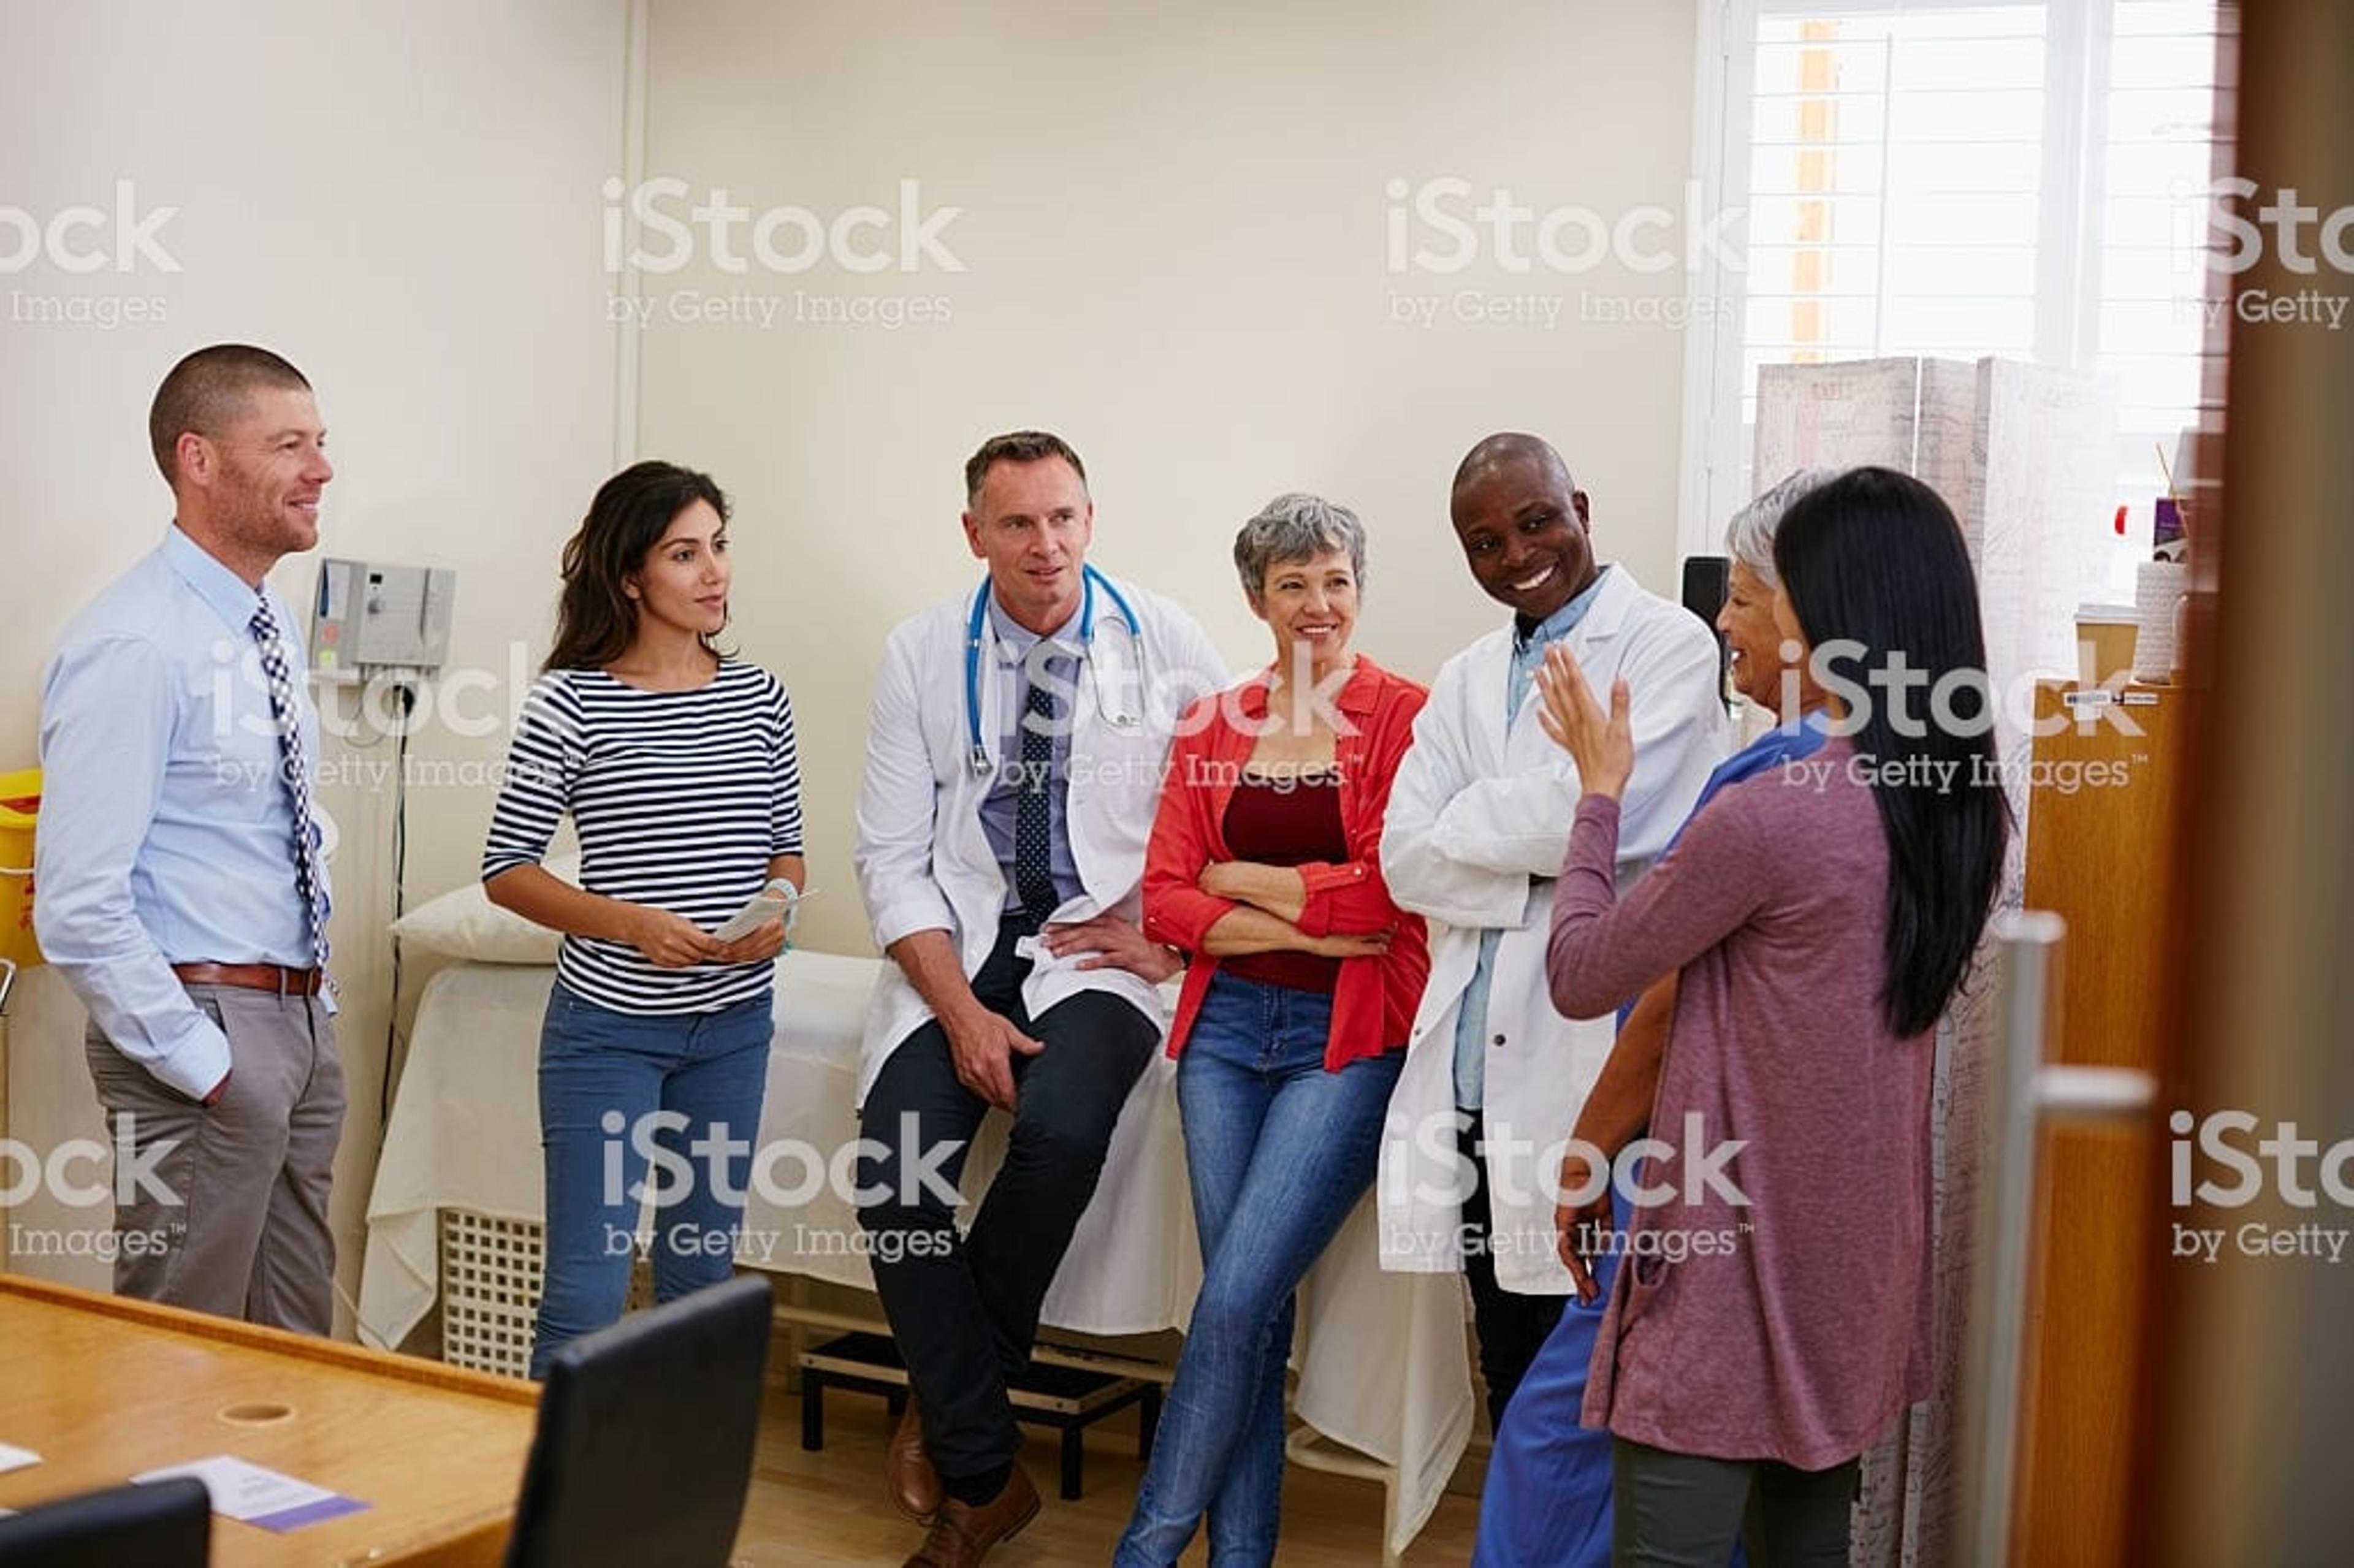 Shot of a doctor working in a hospital